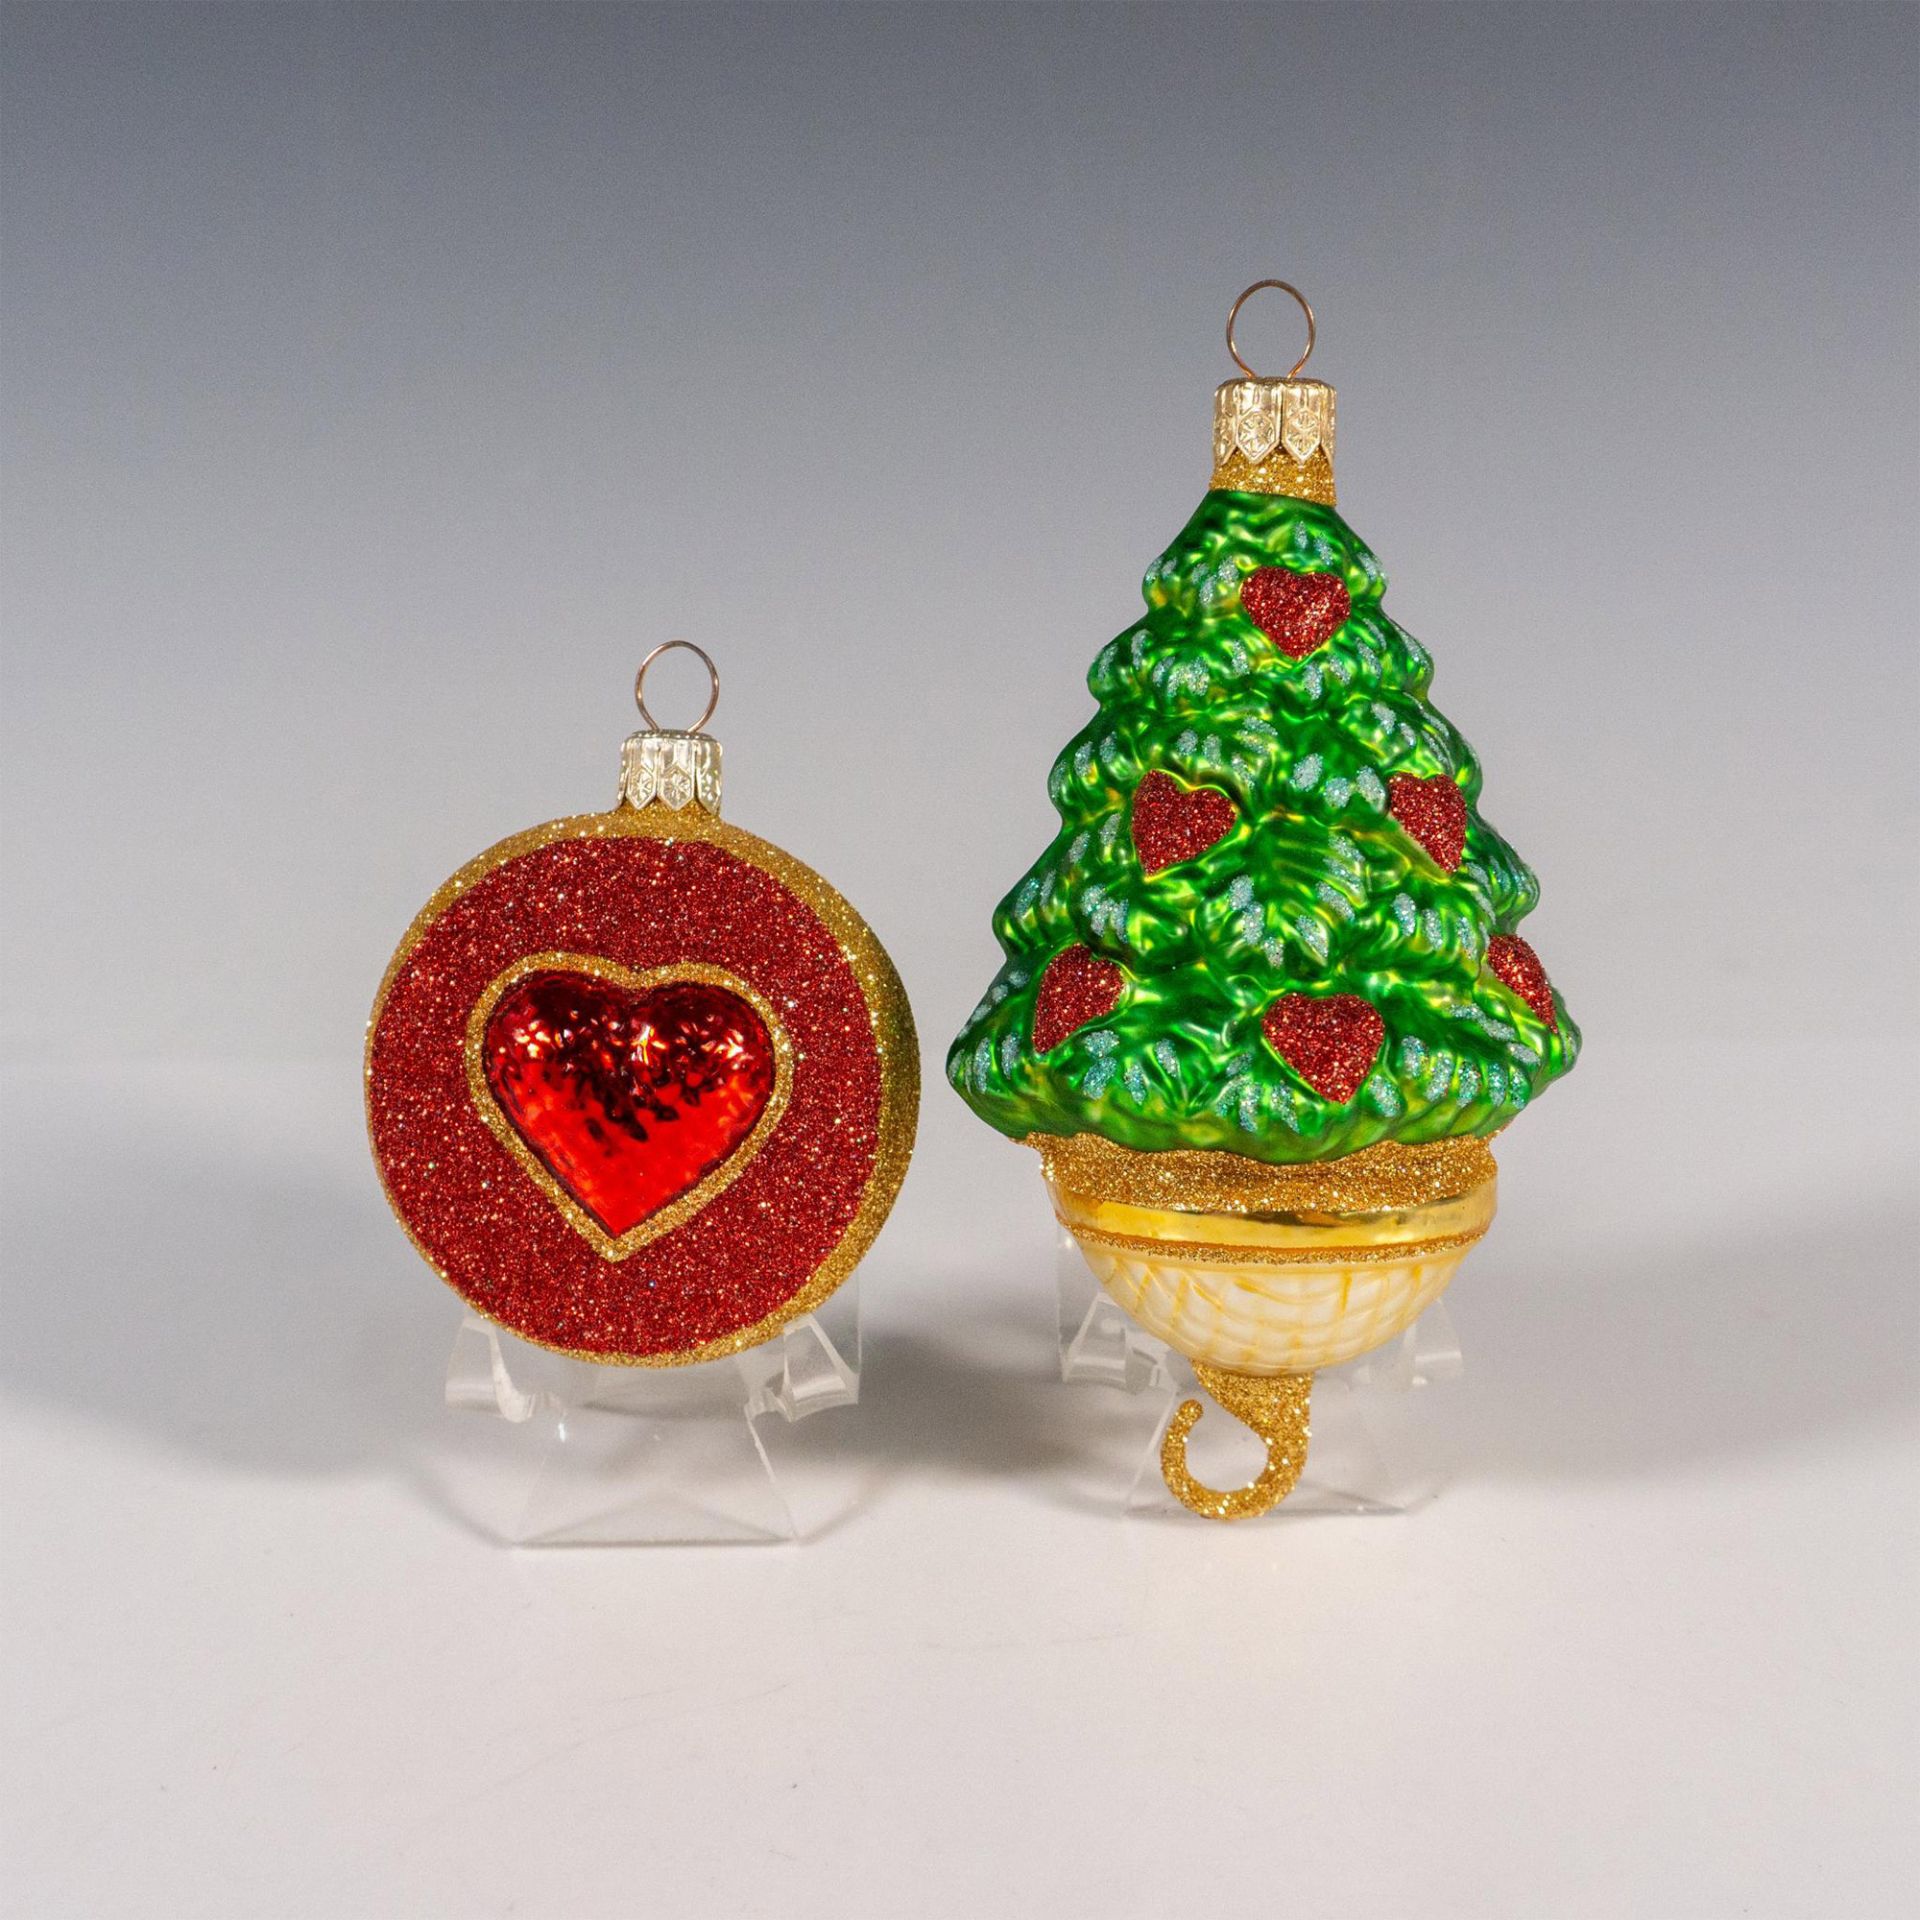 2pc Patricia Breen Christmas Ornament, Five Golden Rings